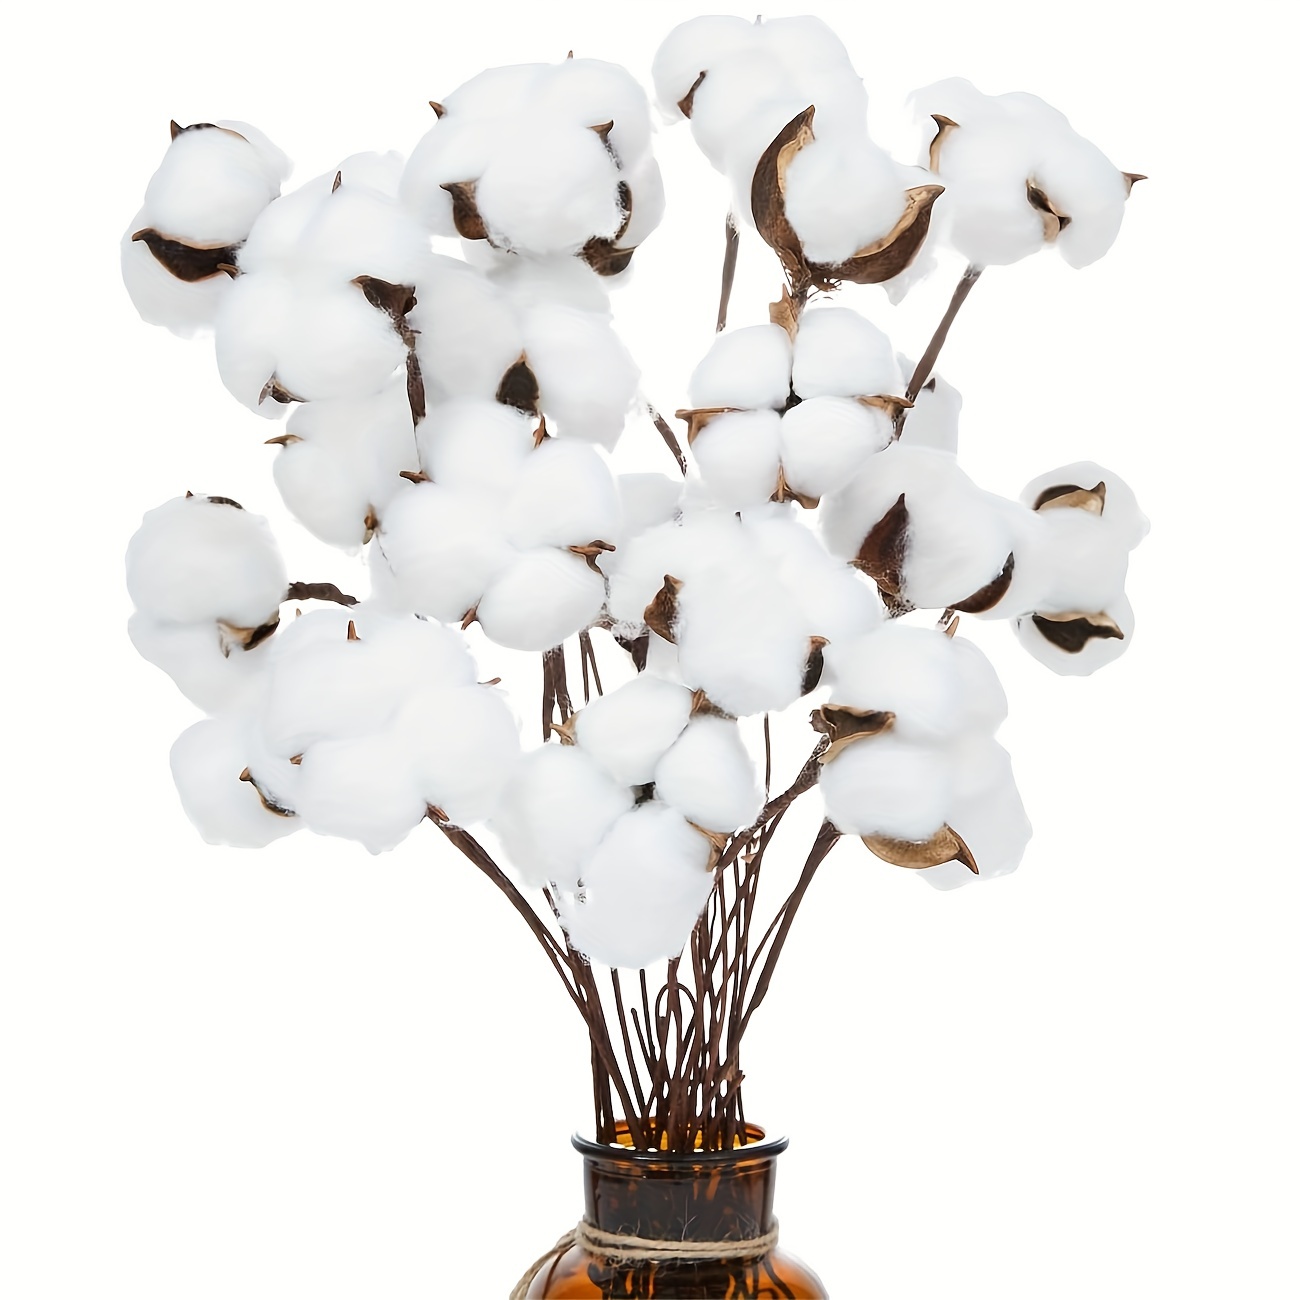 Natural White Cotton Stem Flowers Cotton Boll Branches Floral Stems Filler for Fall Decor Dried Flowers for Vase 21-Inch, Size: 53